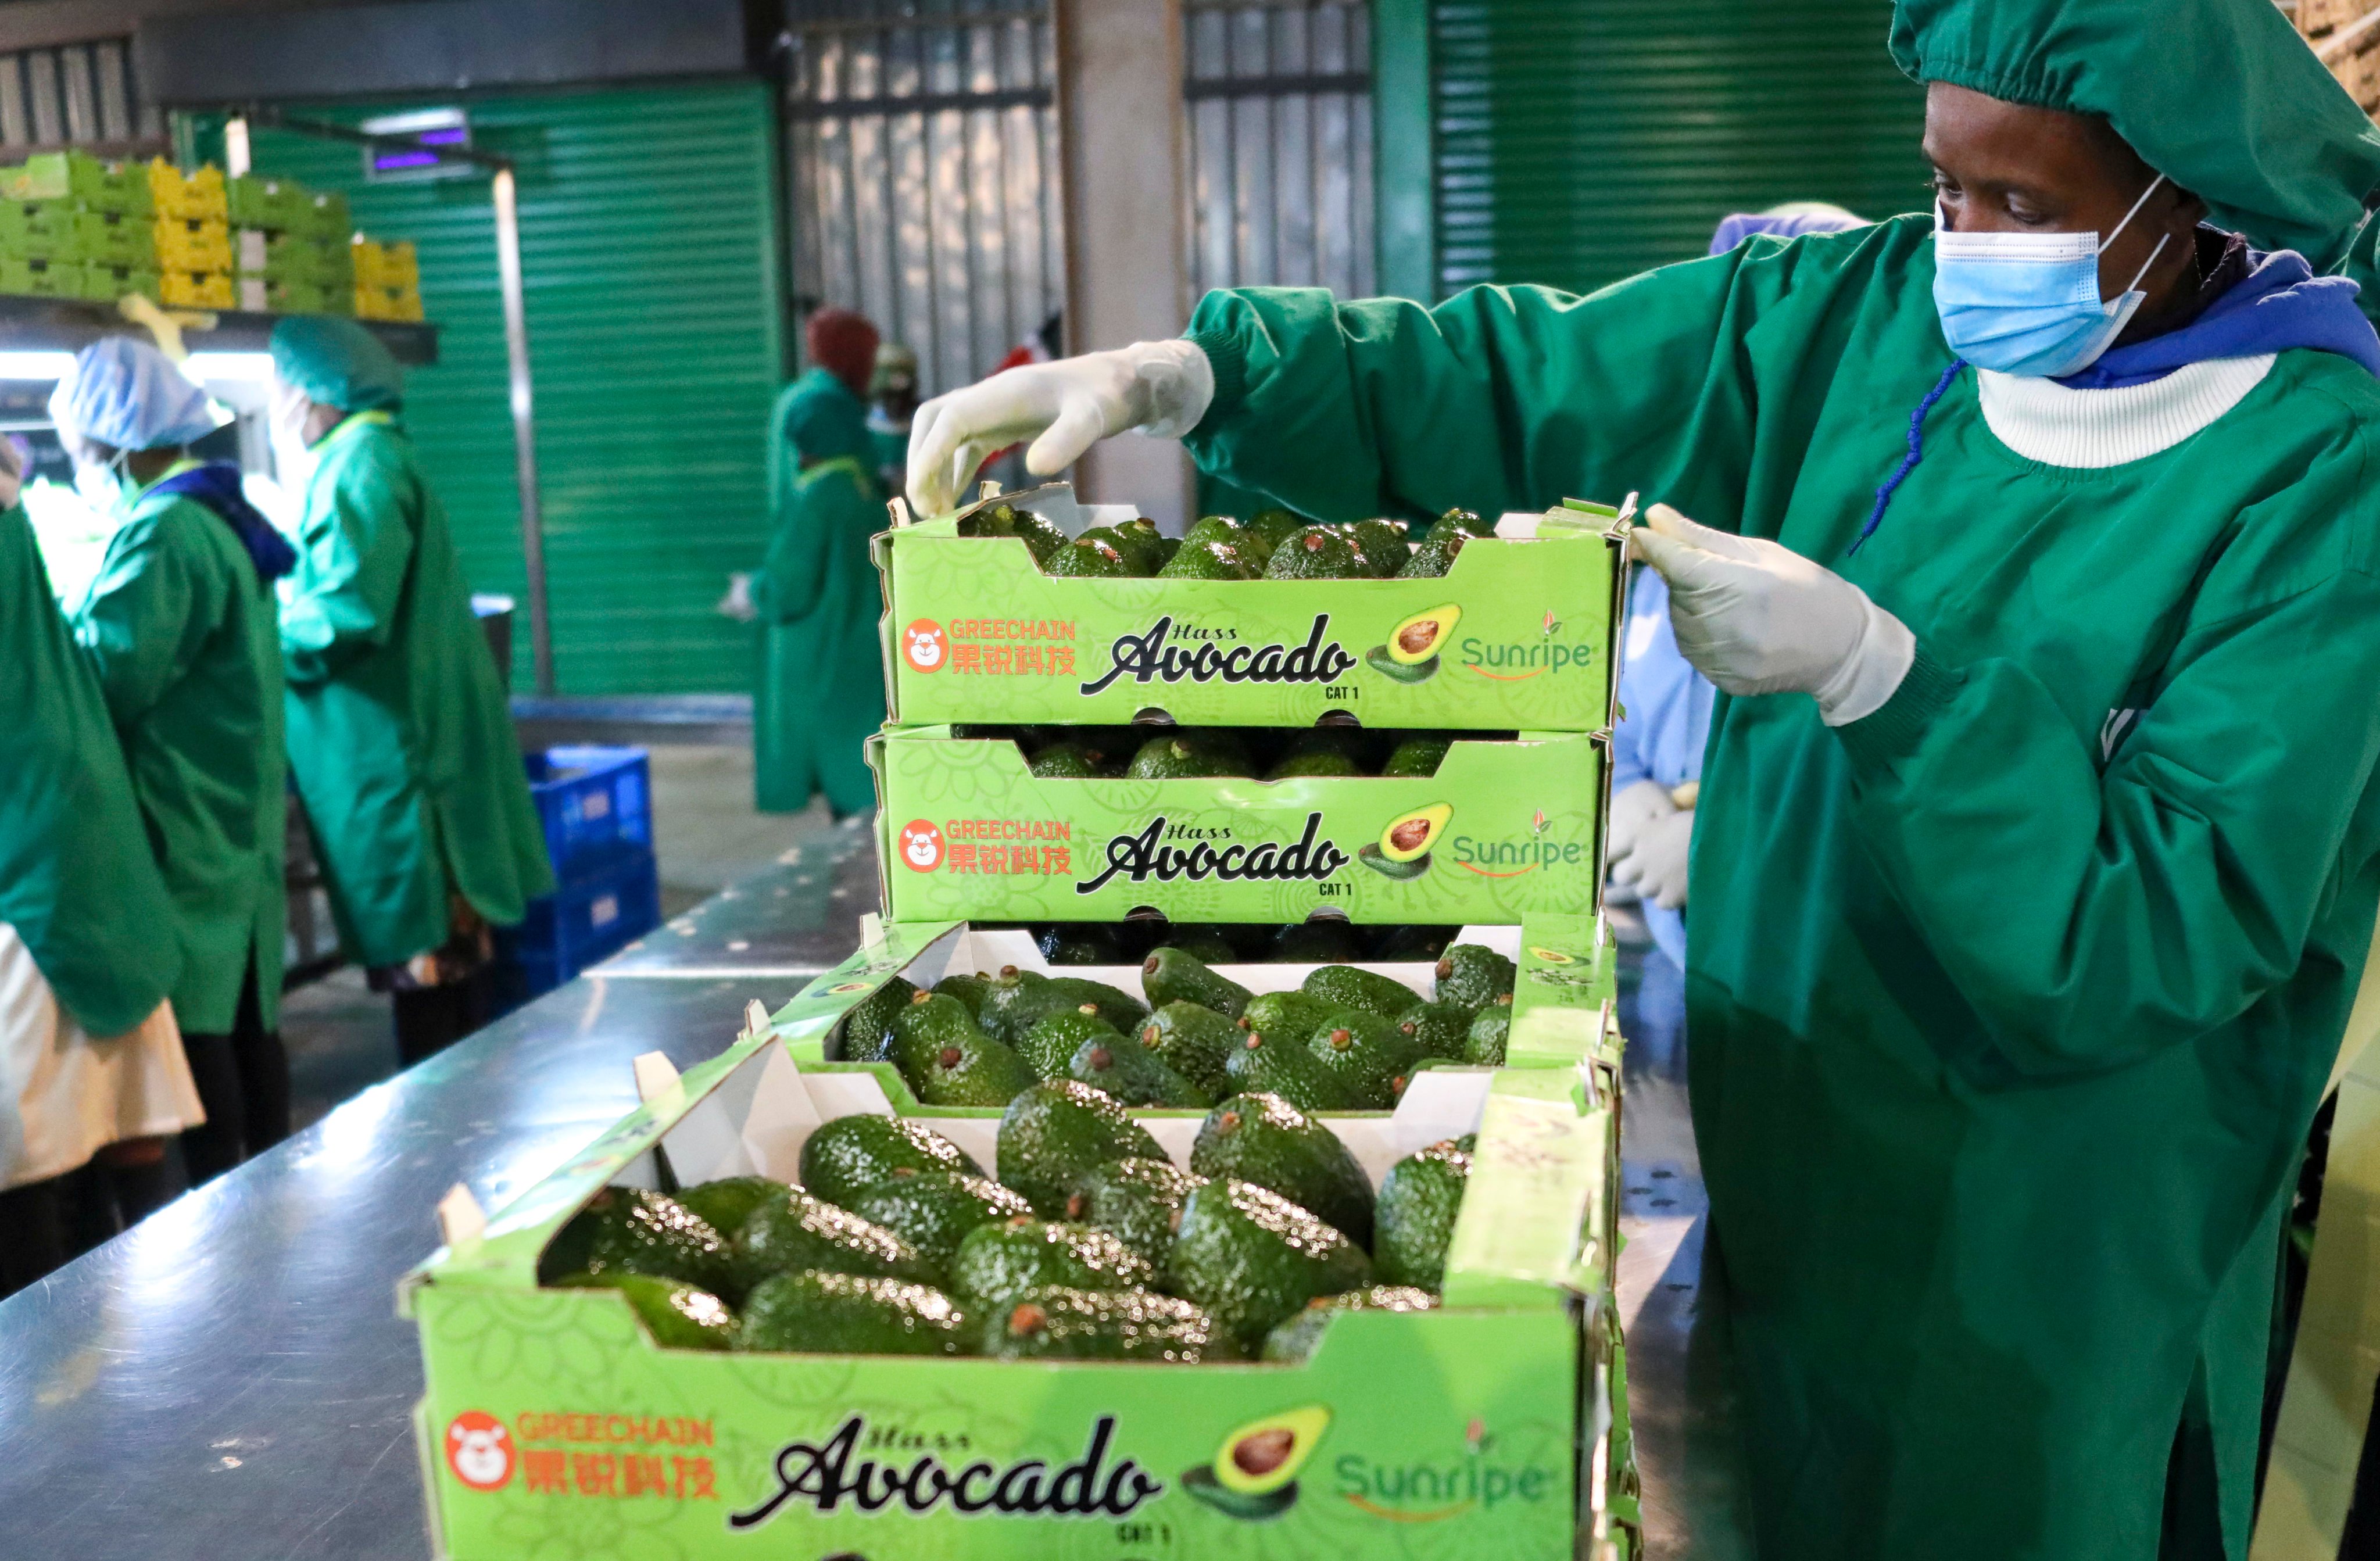 South Africa is hoping to send off its first avocado shipment to China next month as it becomes the third African country after Kenya (pictured) and Tanzania to export the fruit to the Asian power. Photo: Xinhua